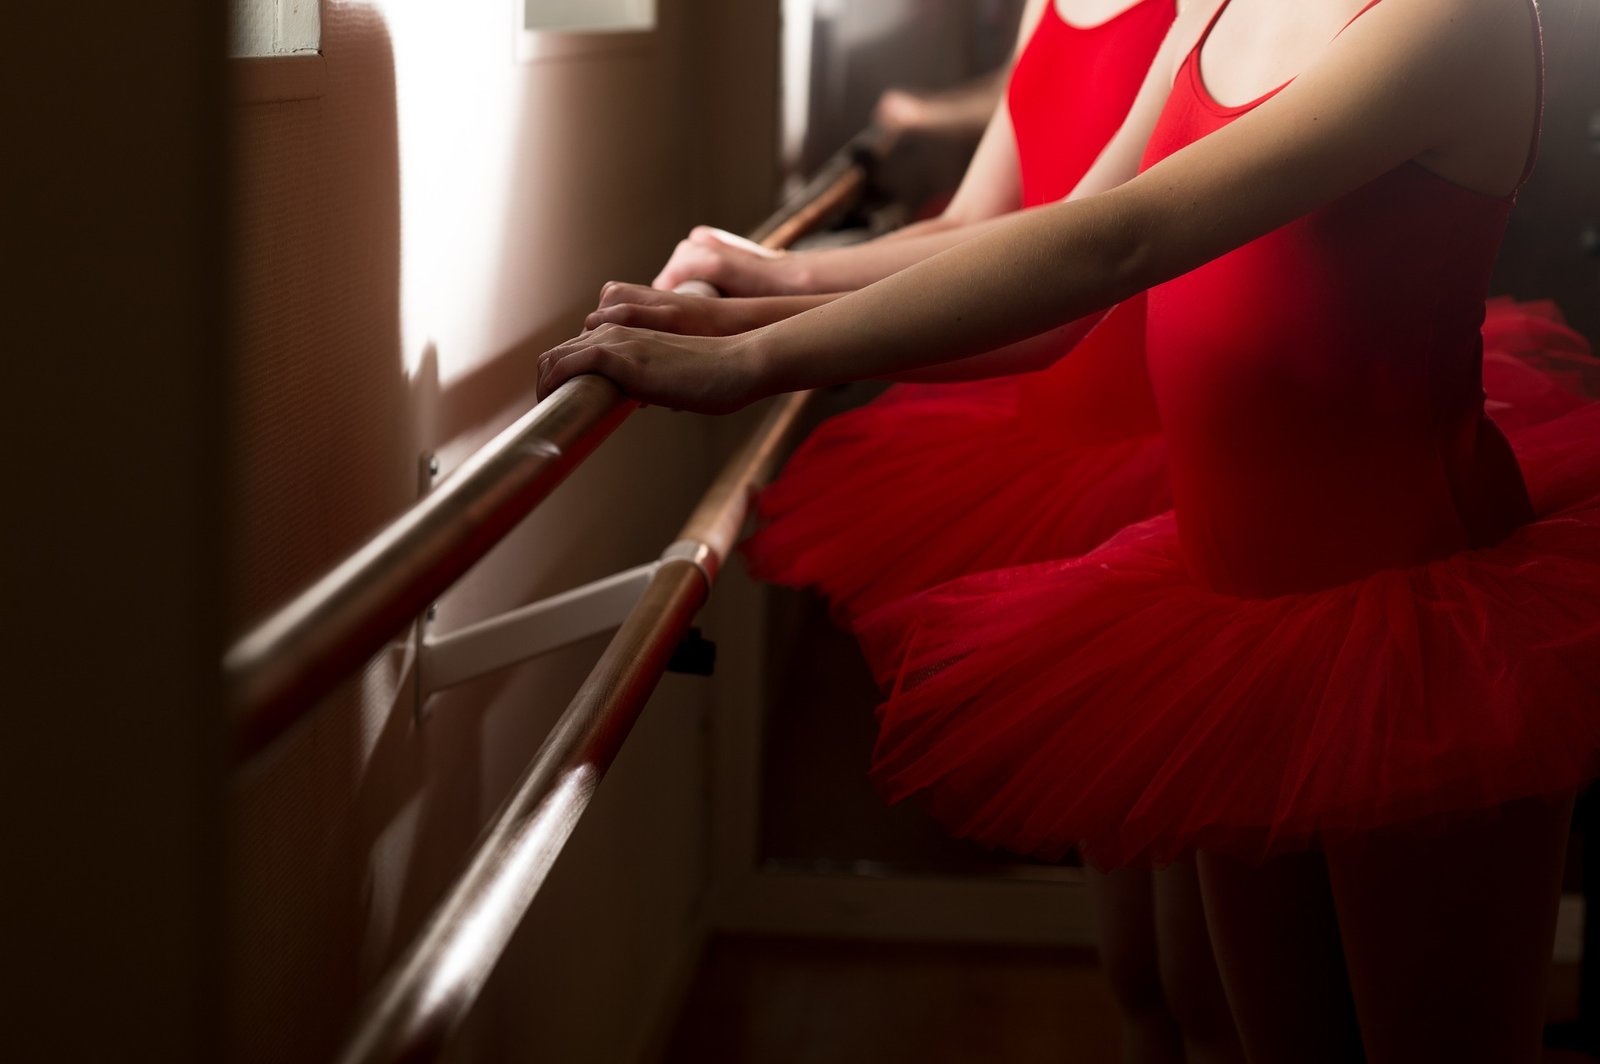 The Ultimate Guide to Buying the Best Ballet Barre for Home in 2023